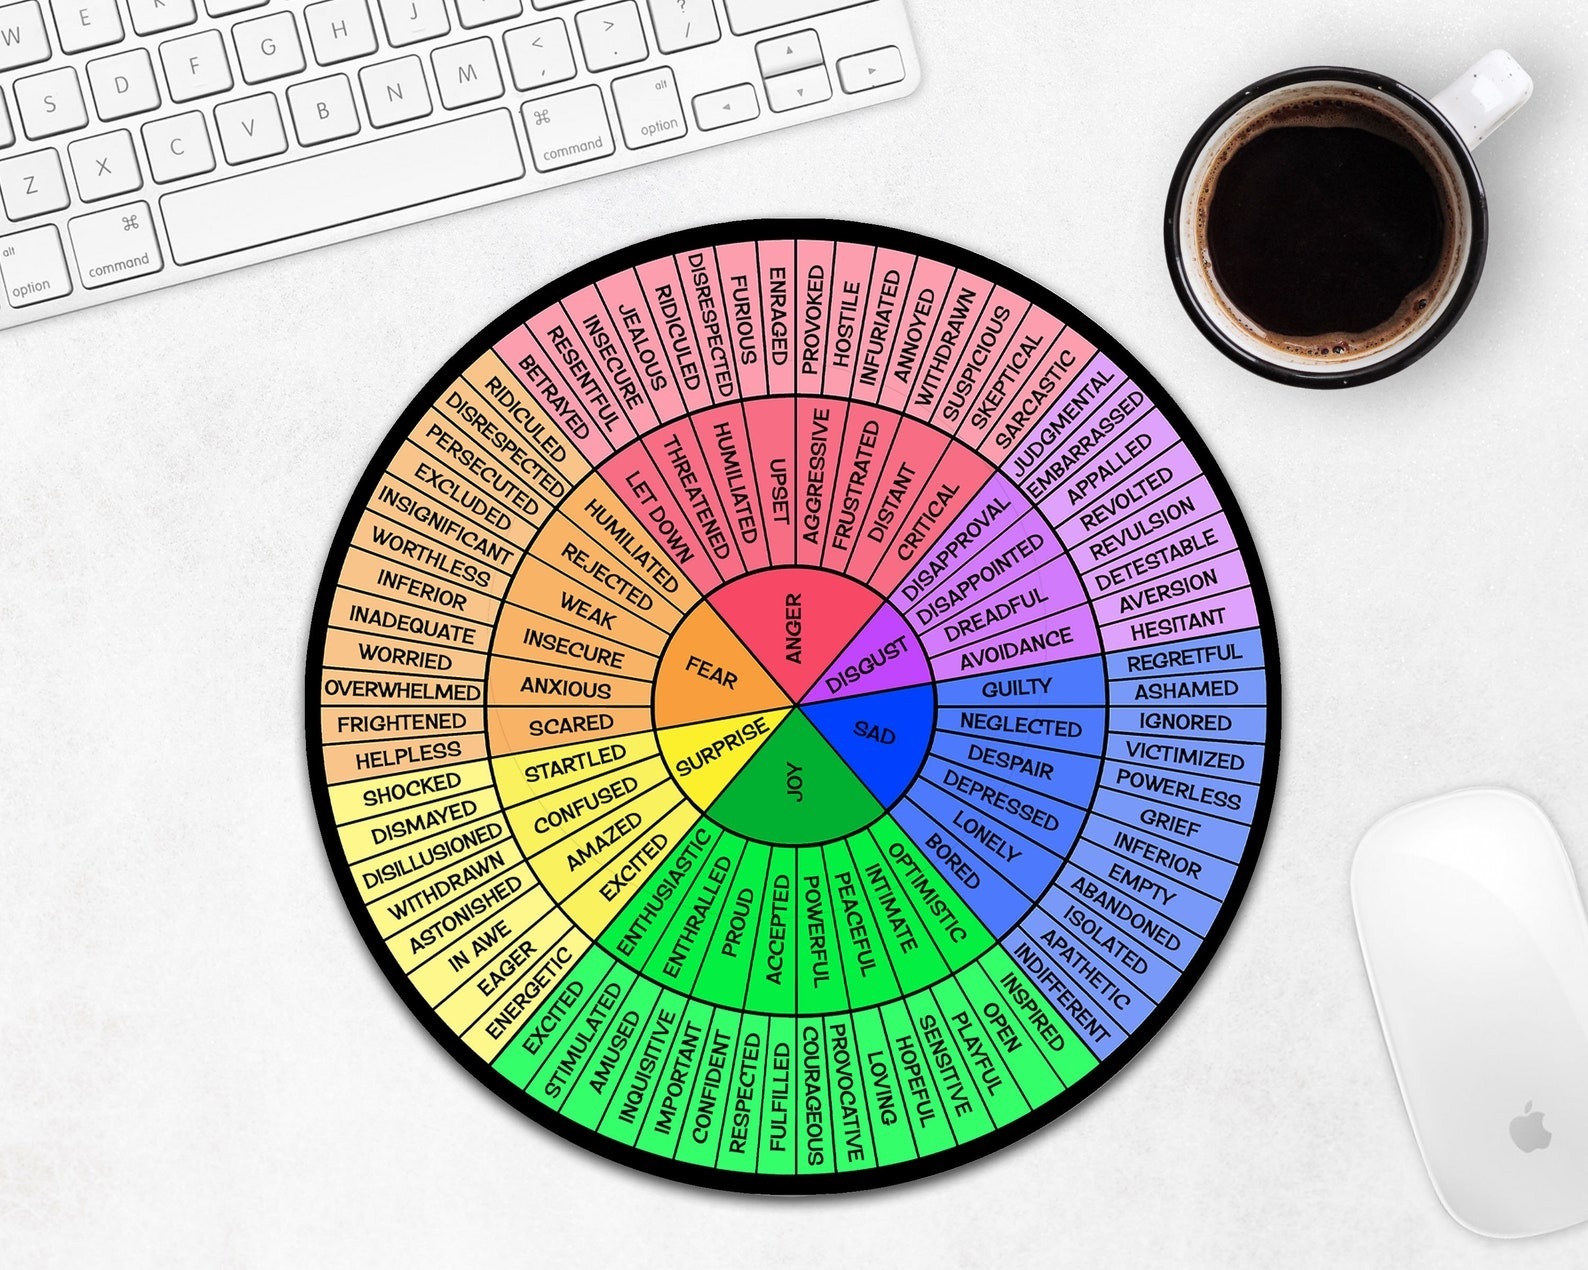 The color wheel mouse pad